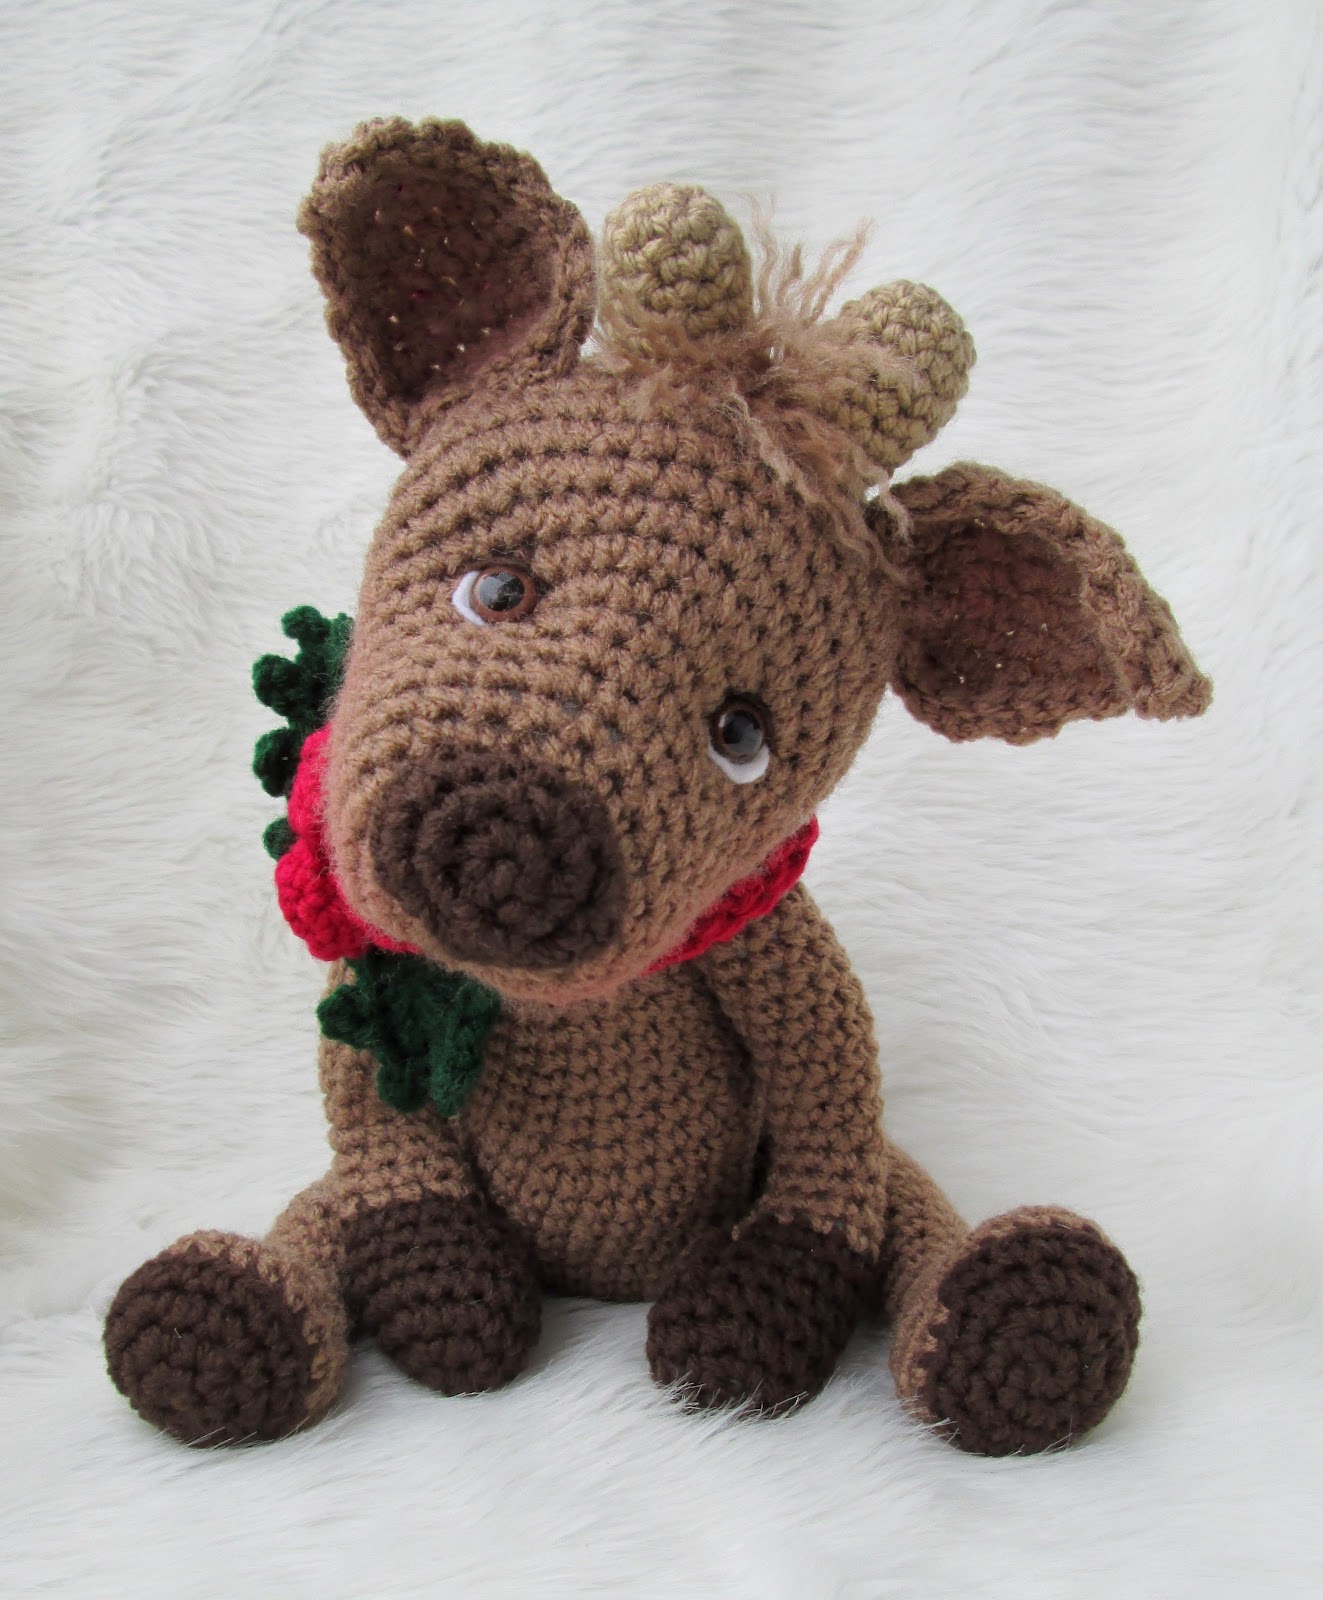 Wool and Whims: New Crochet Pattern, Simply Cute Reindeer